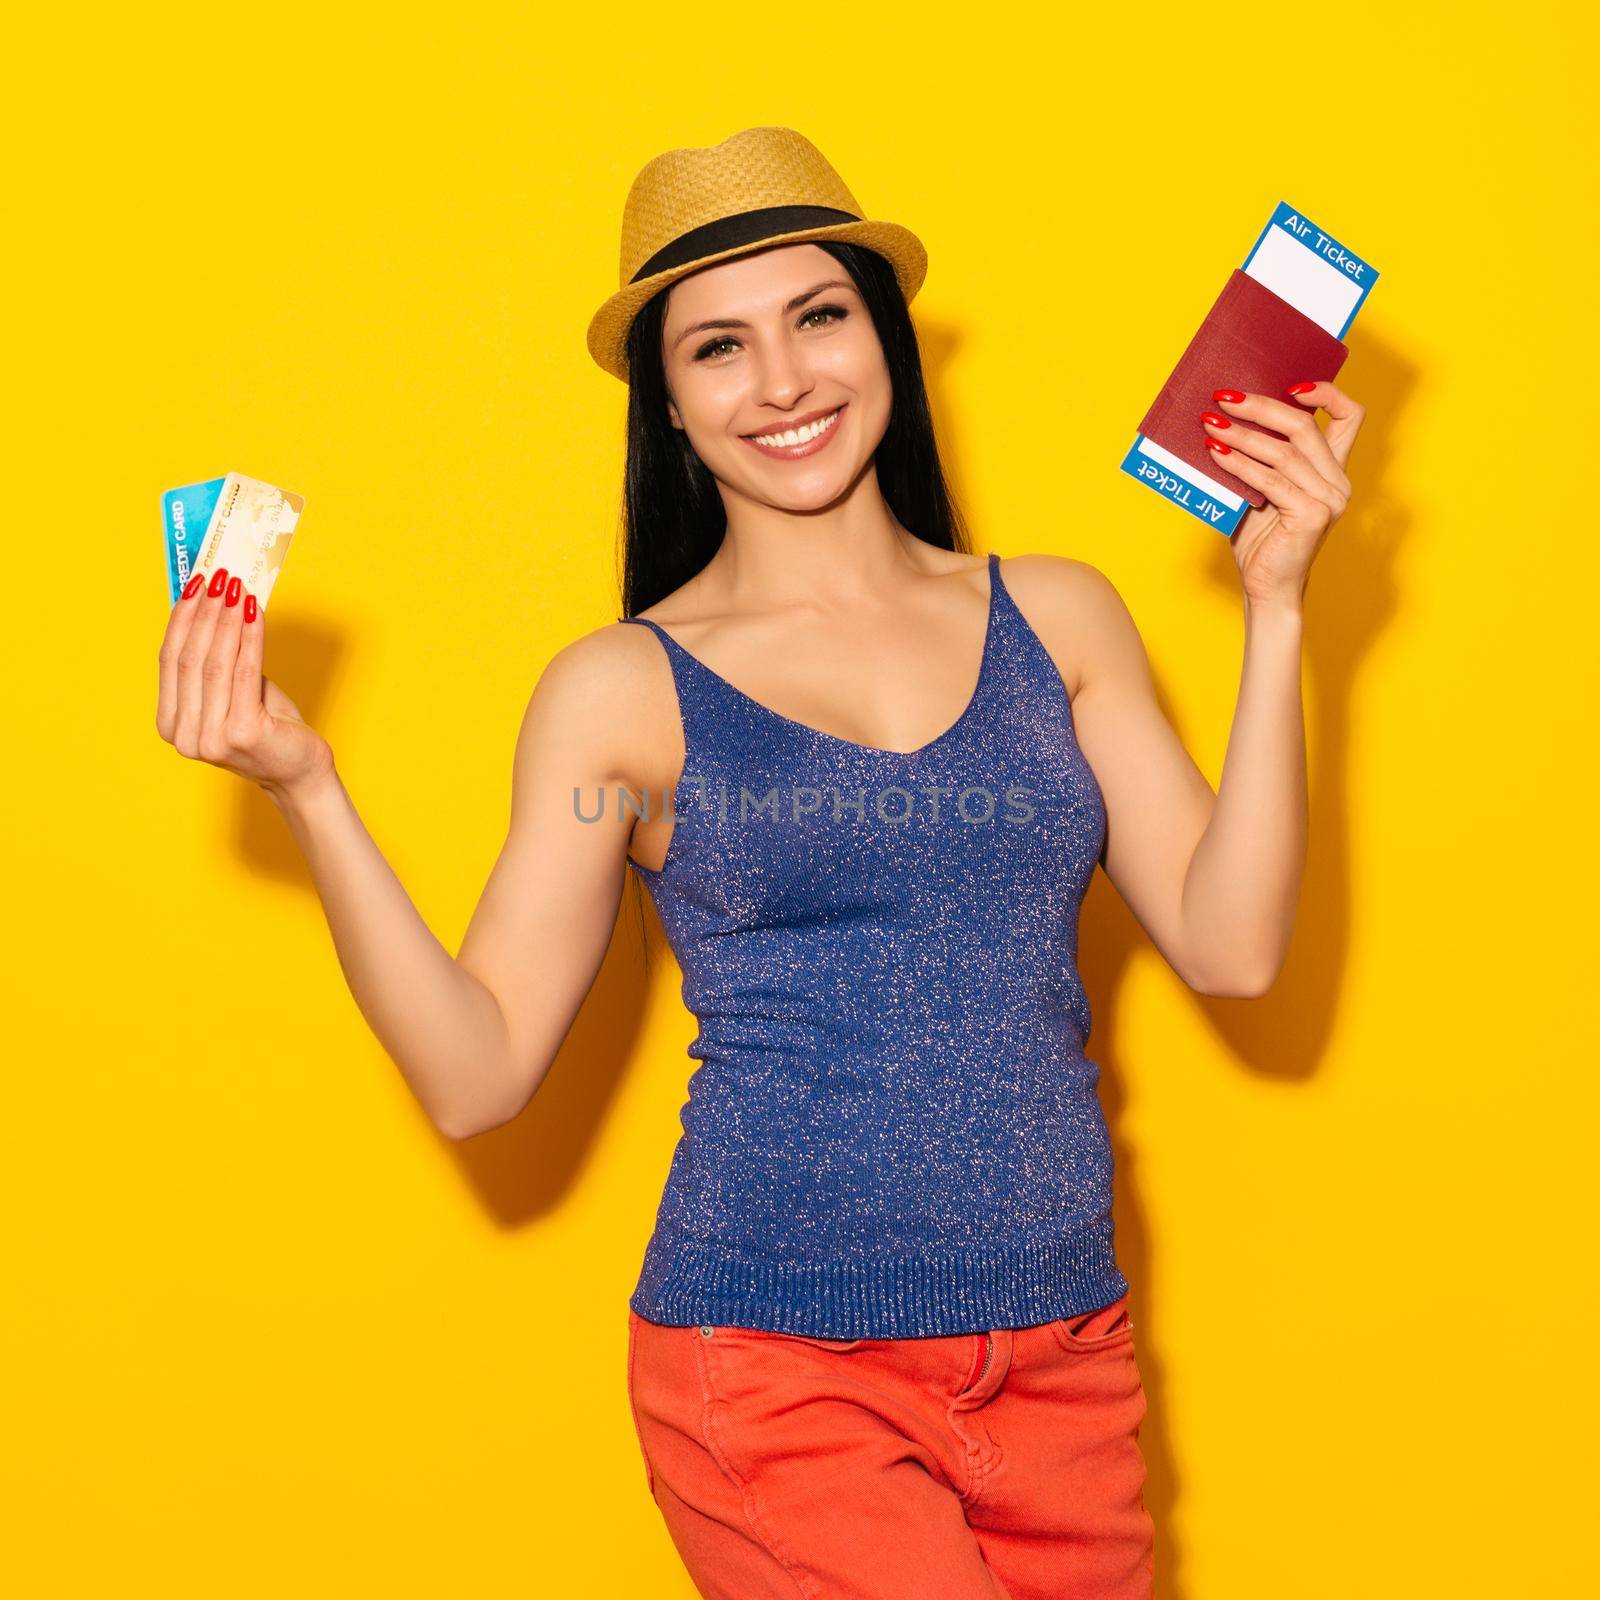 Young smiling excited woman student holding passport boarding pass ticket and credit card isolated on yellow background. Air travel flight - Image